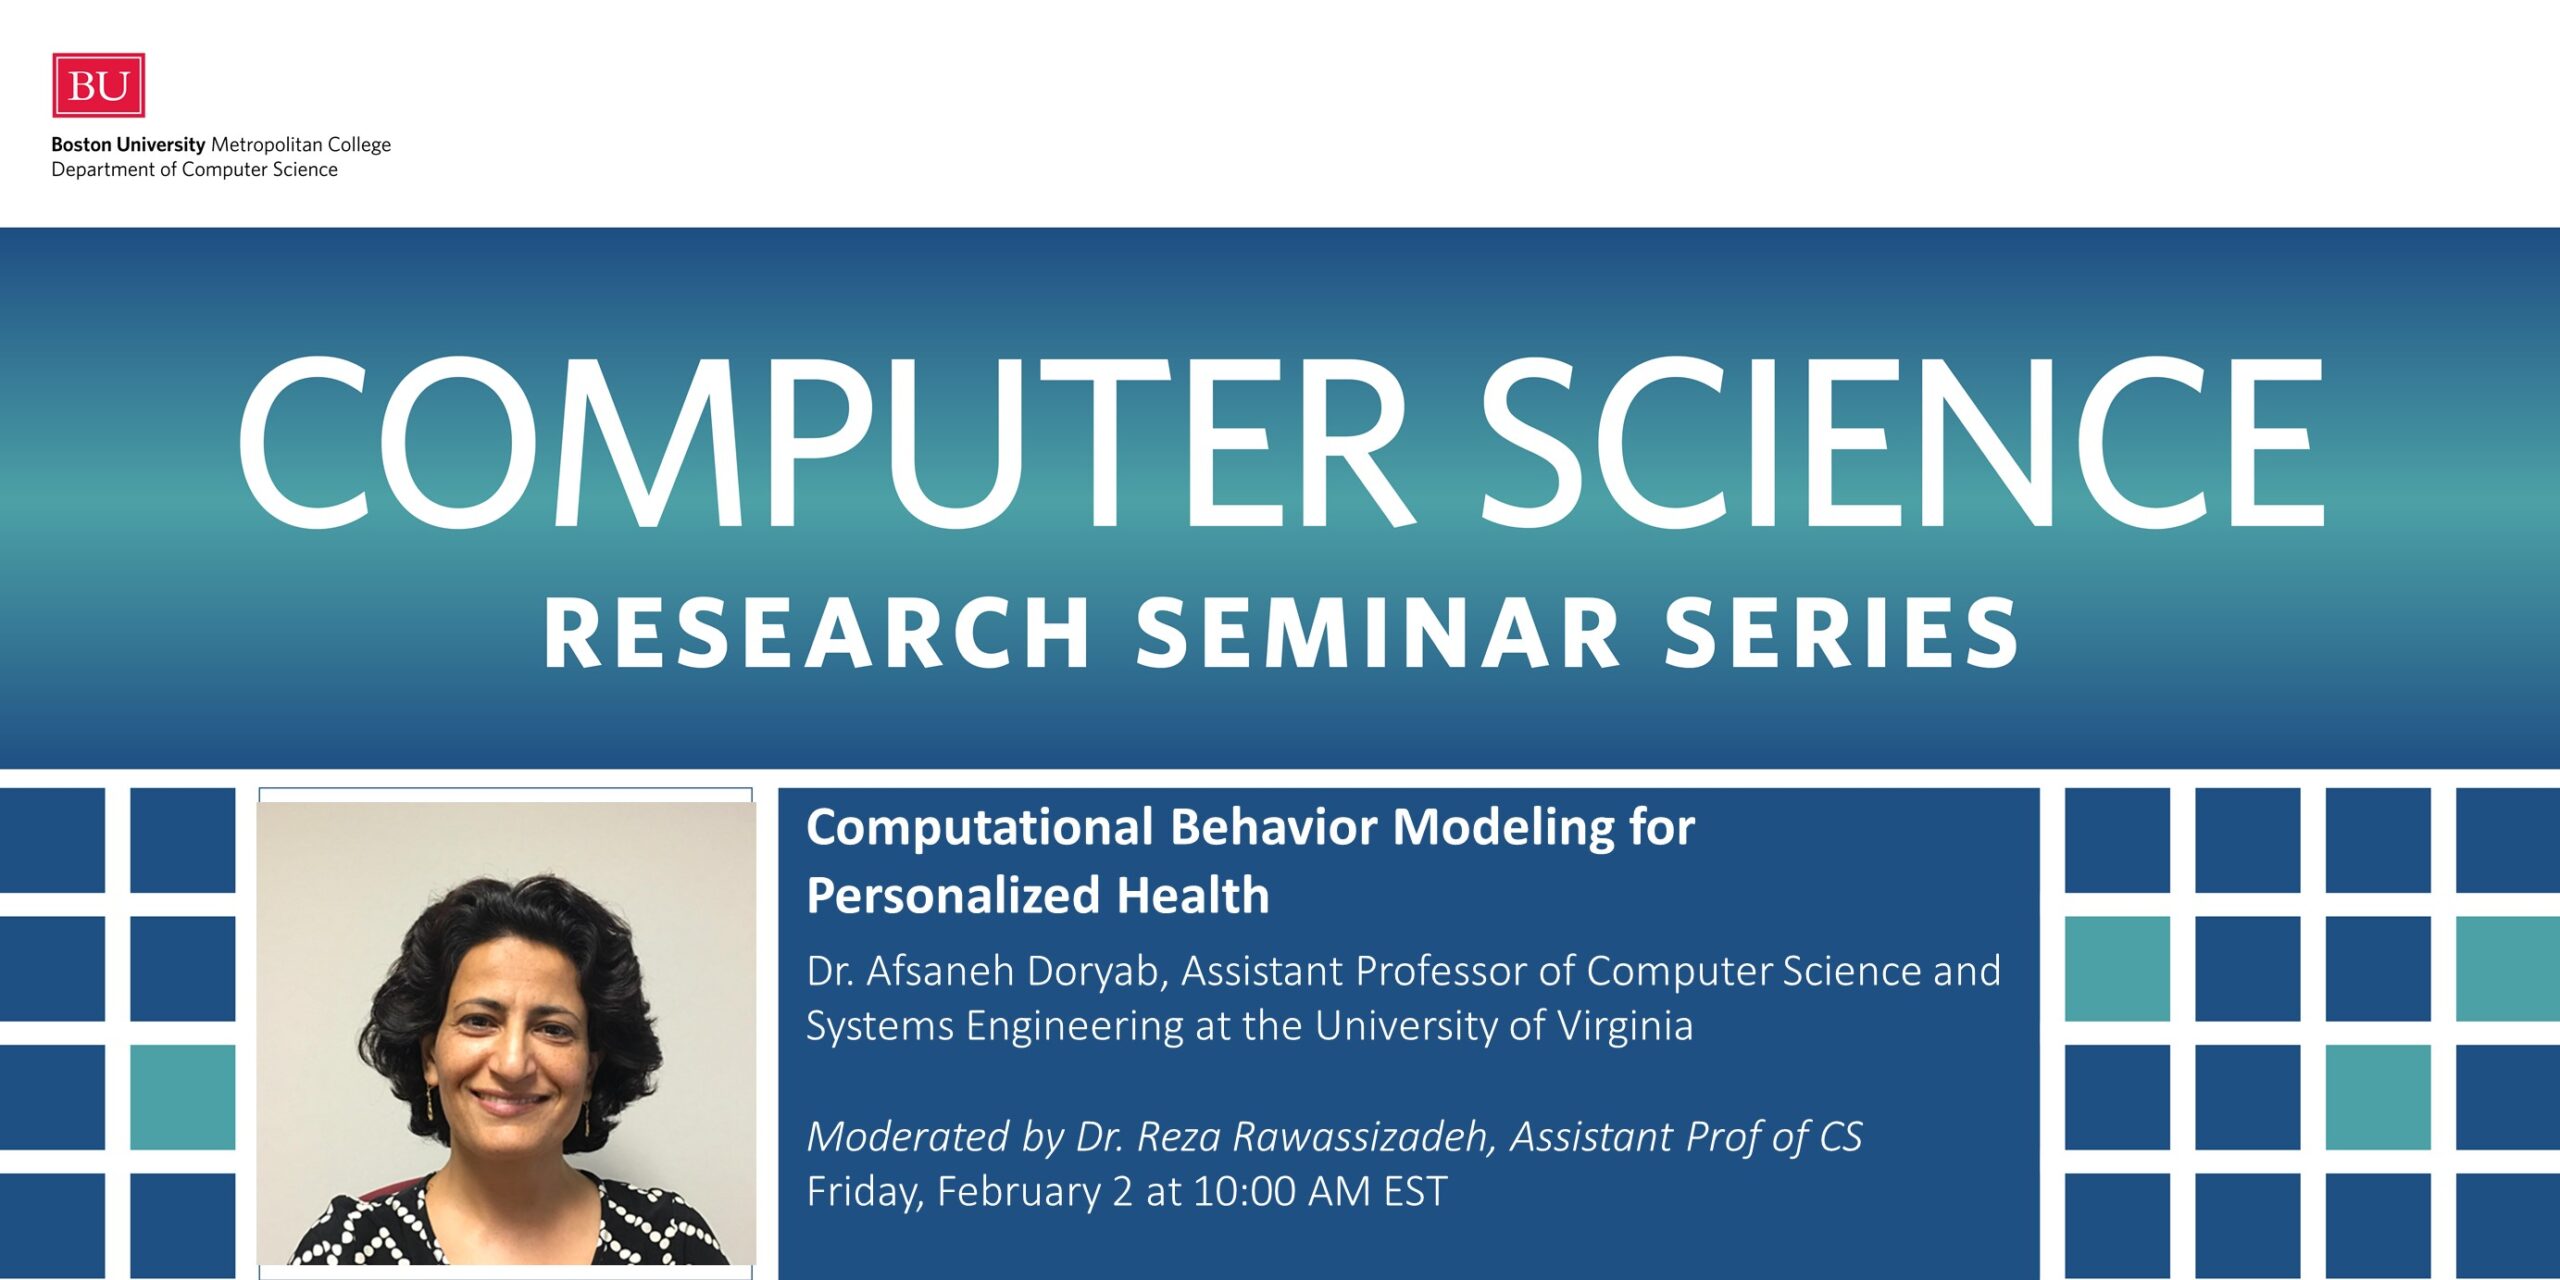 Computer Science Seminar Series Graphic for Afsaneh Doryab